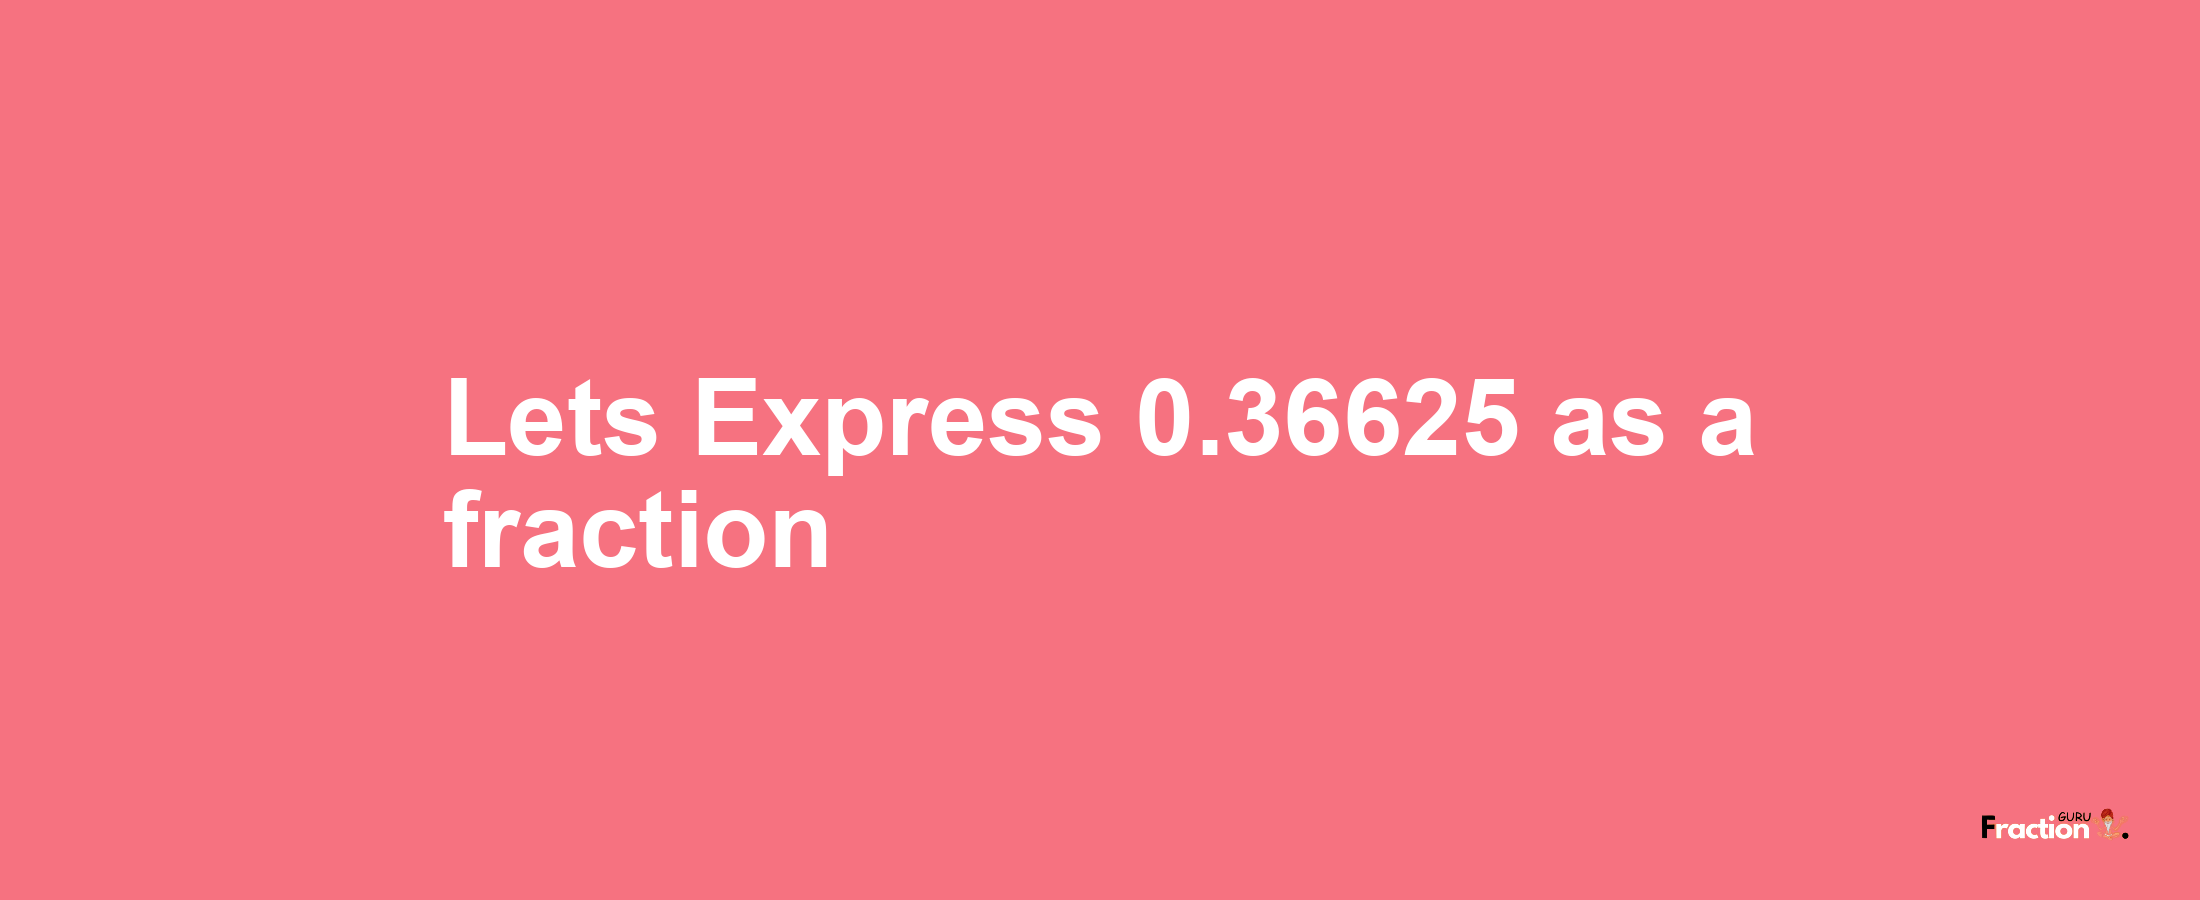 Lets Express 0.36625 as afraction